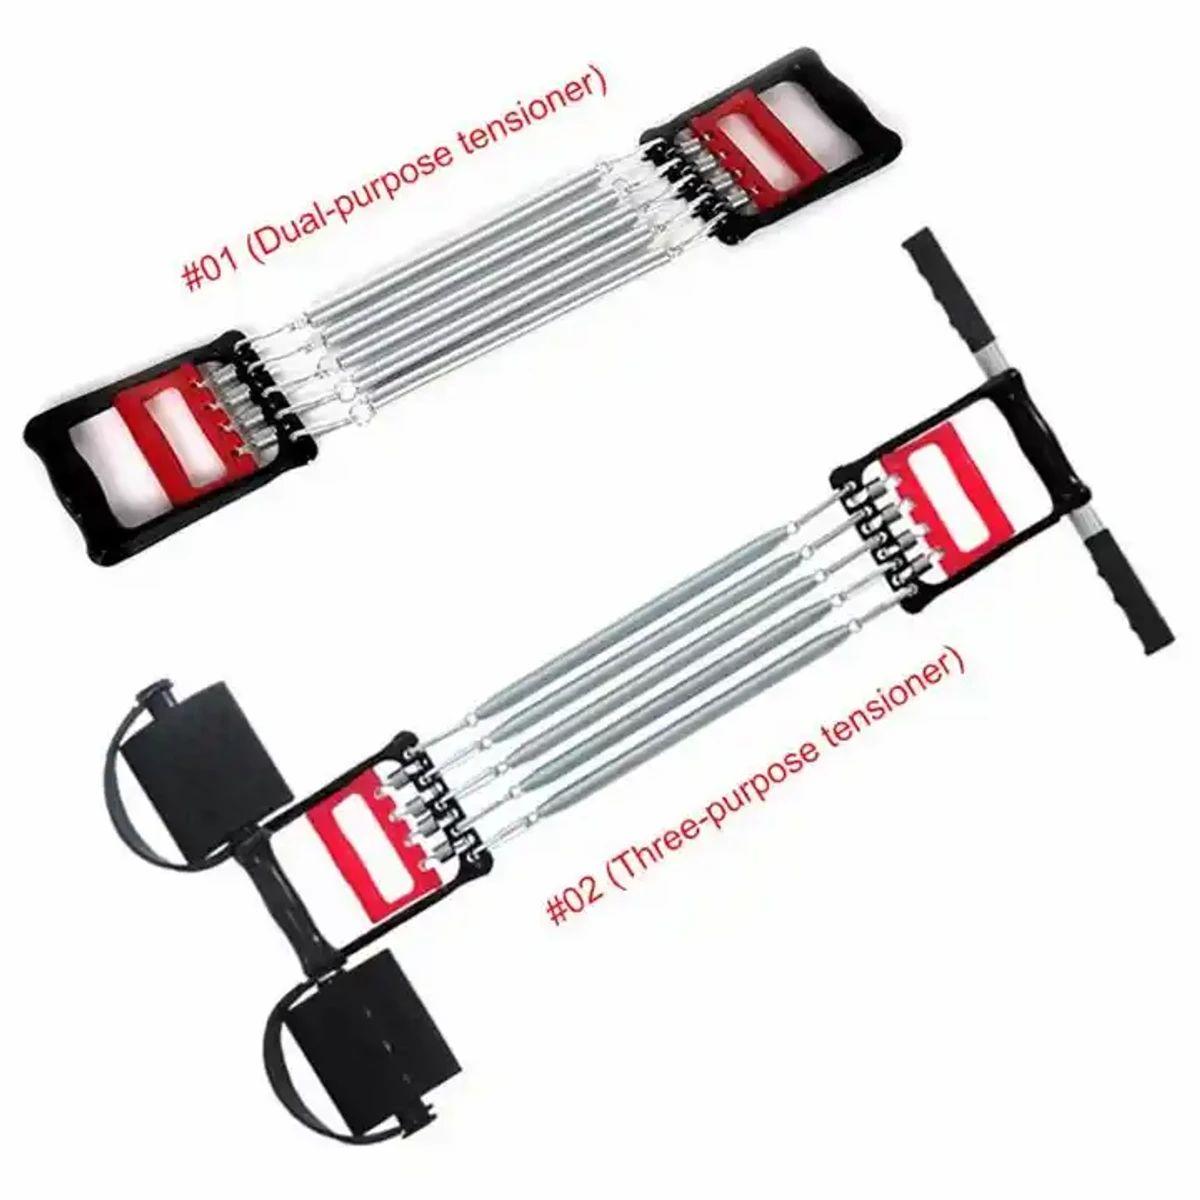 5 Spring -Multi Function Chest Pull Expander